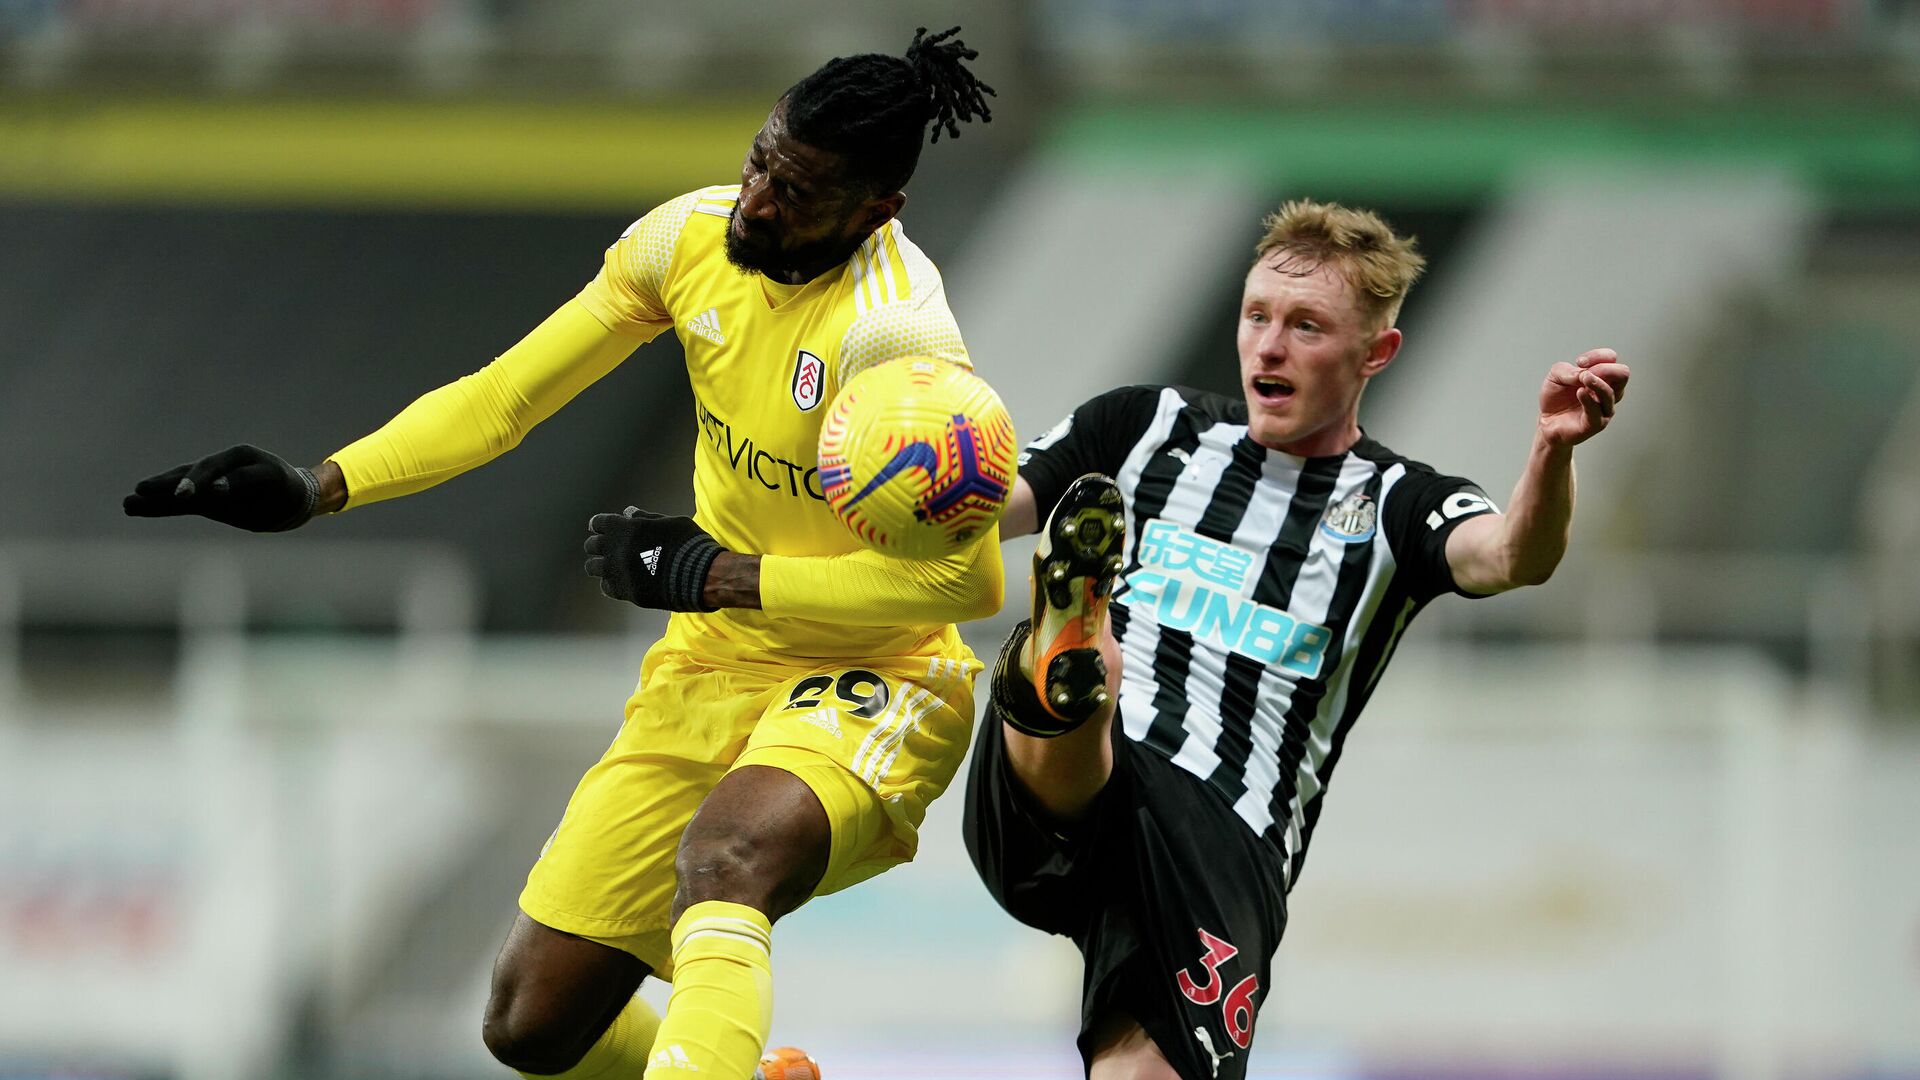 Fulham's Cameroonian midfielder Andre-Frank Zambo Anguissa (L) and Newcastle United's English midfielder Sean Longstaff compete during the English Premier League football match between Newcastle United and Fulham at St James' Park in Newcastle-upon-Tyne, north east England on December 19, 2020. (Photo by Owen Humphreys / POOL / AFP) / RESTRICTED TO EDITORIAL USE. No use with unauthorized audio, video, data, fixture lists, club/league logos or 'live' services. Online in-match use limited to 120 images. An additional 40 images may be used in extra time. No video emulation. Social media in-match use limited to 120 images. An additional 40 images may be used in extra time. No use in betting publications, games or single club/league/player publications. /  - РИА Новости, 1920, 20.12.2020